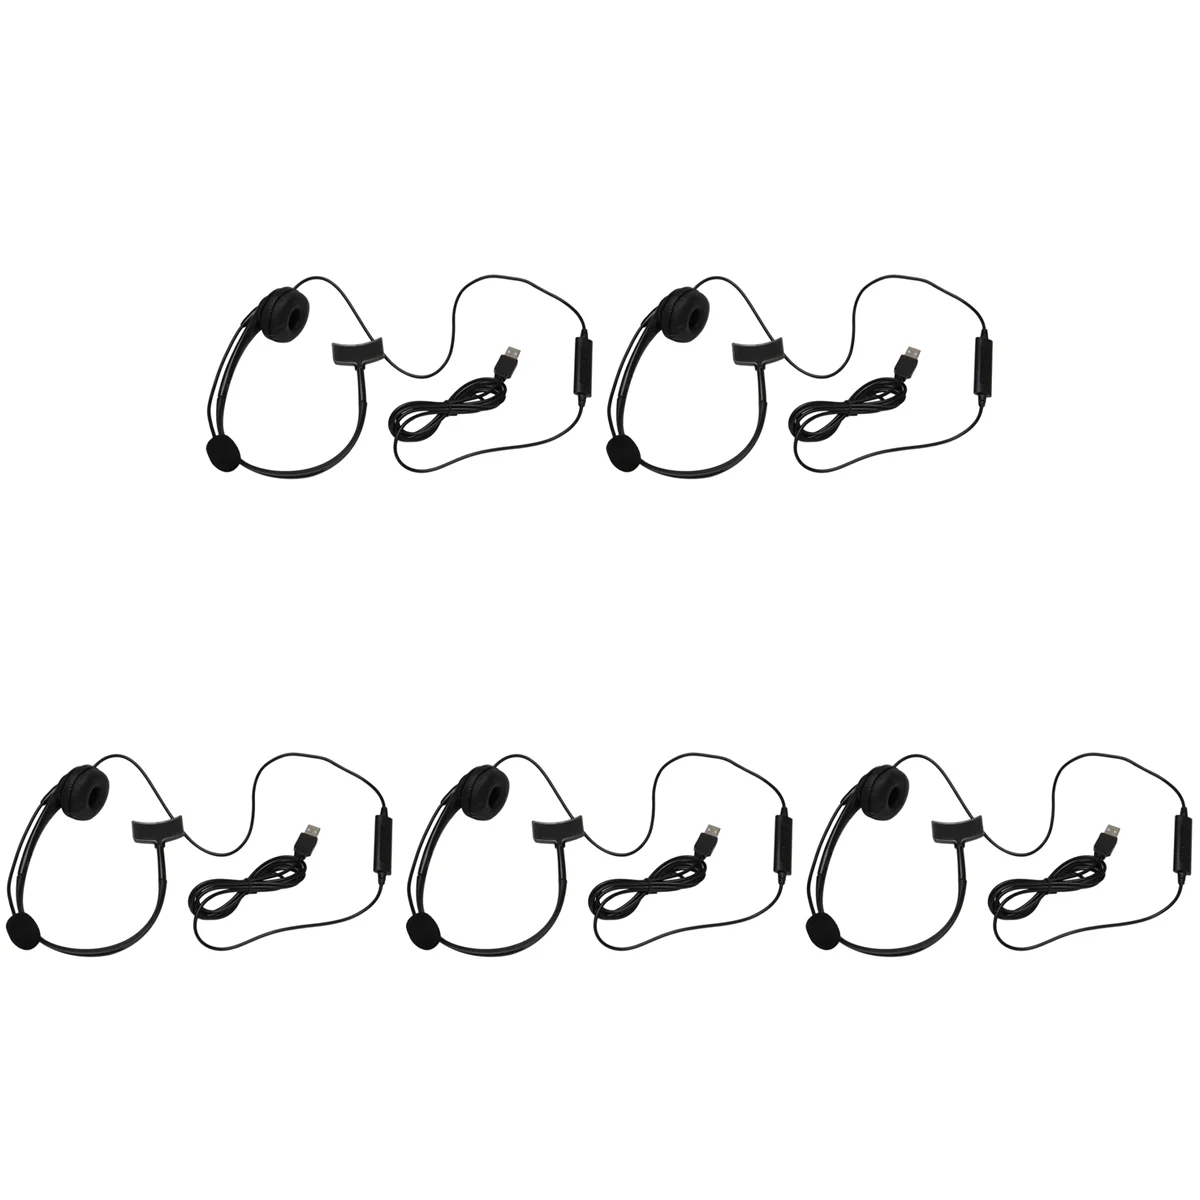 

5X USB Call Center Headset with Noise Cancelling Mic Monaural Headphone for PC Home Office Phone Service Plug and Play